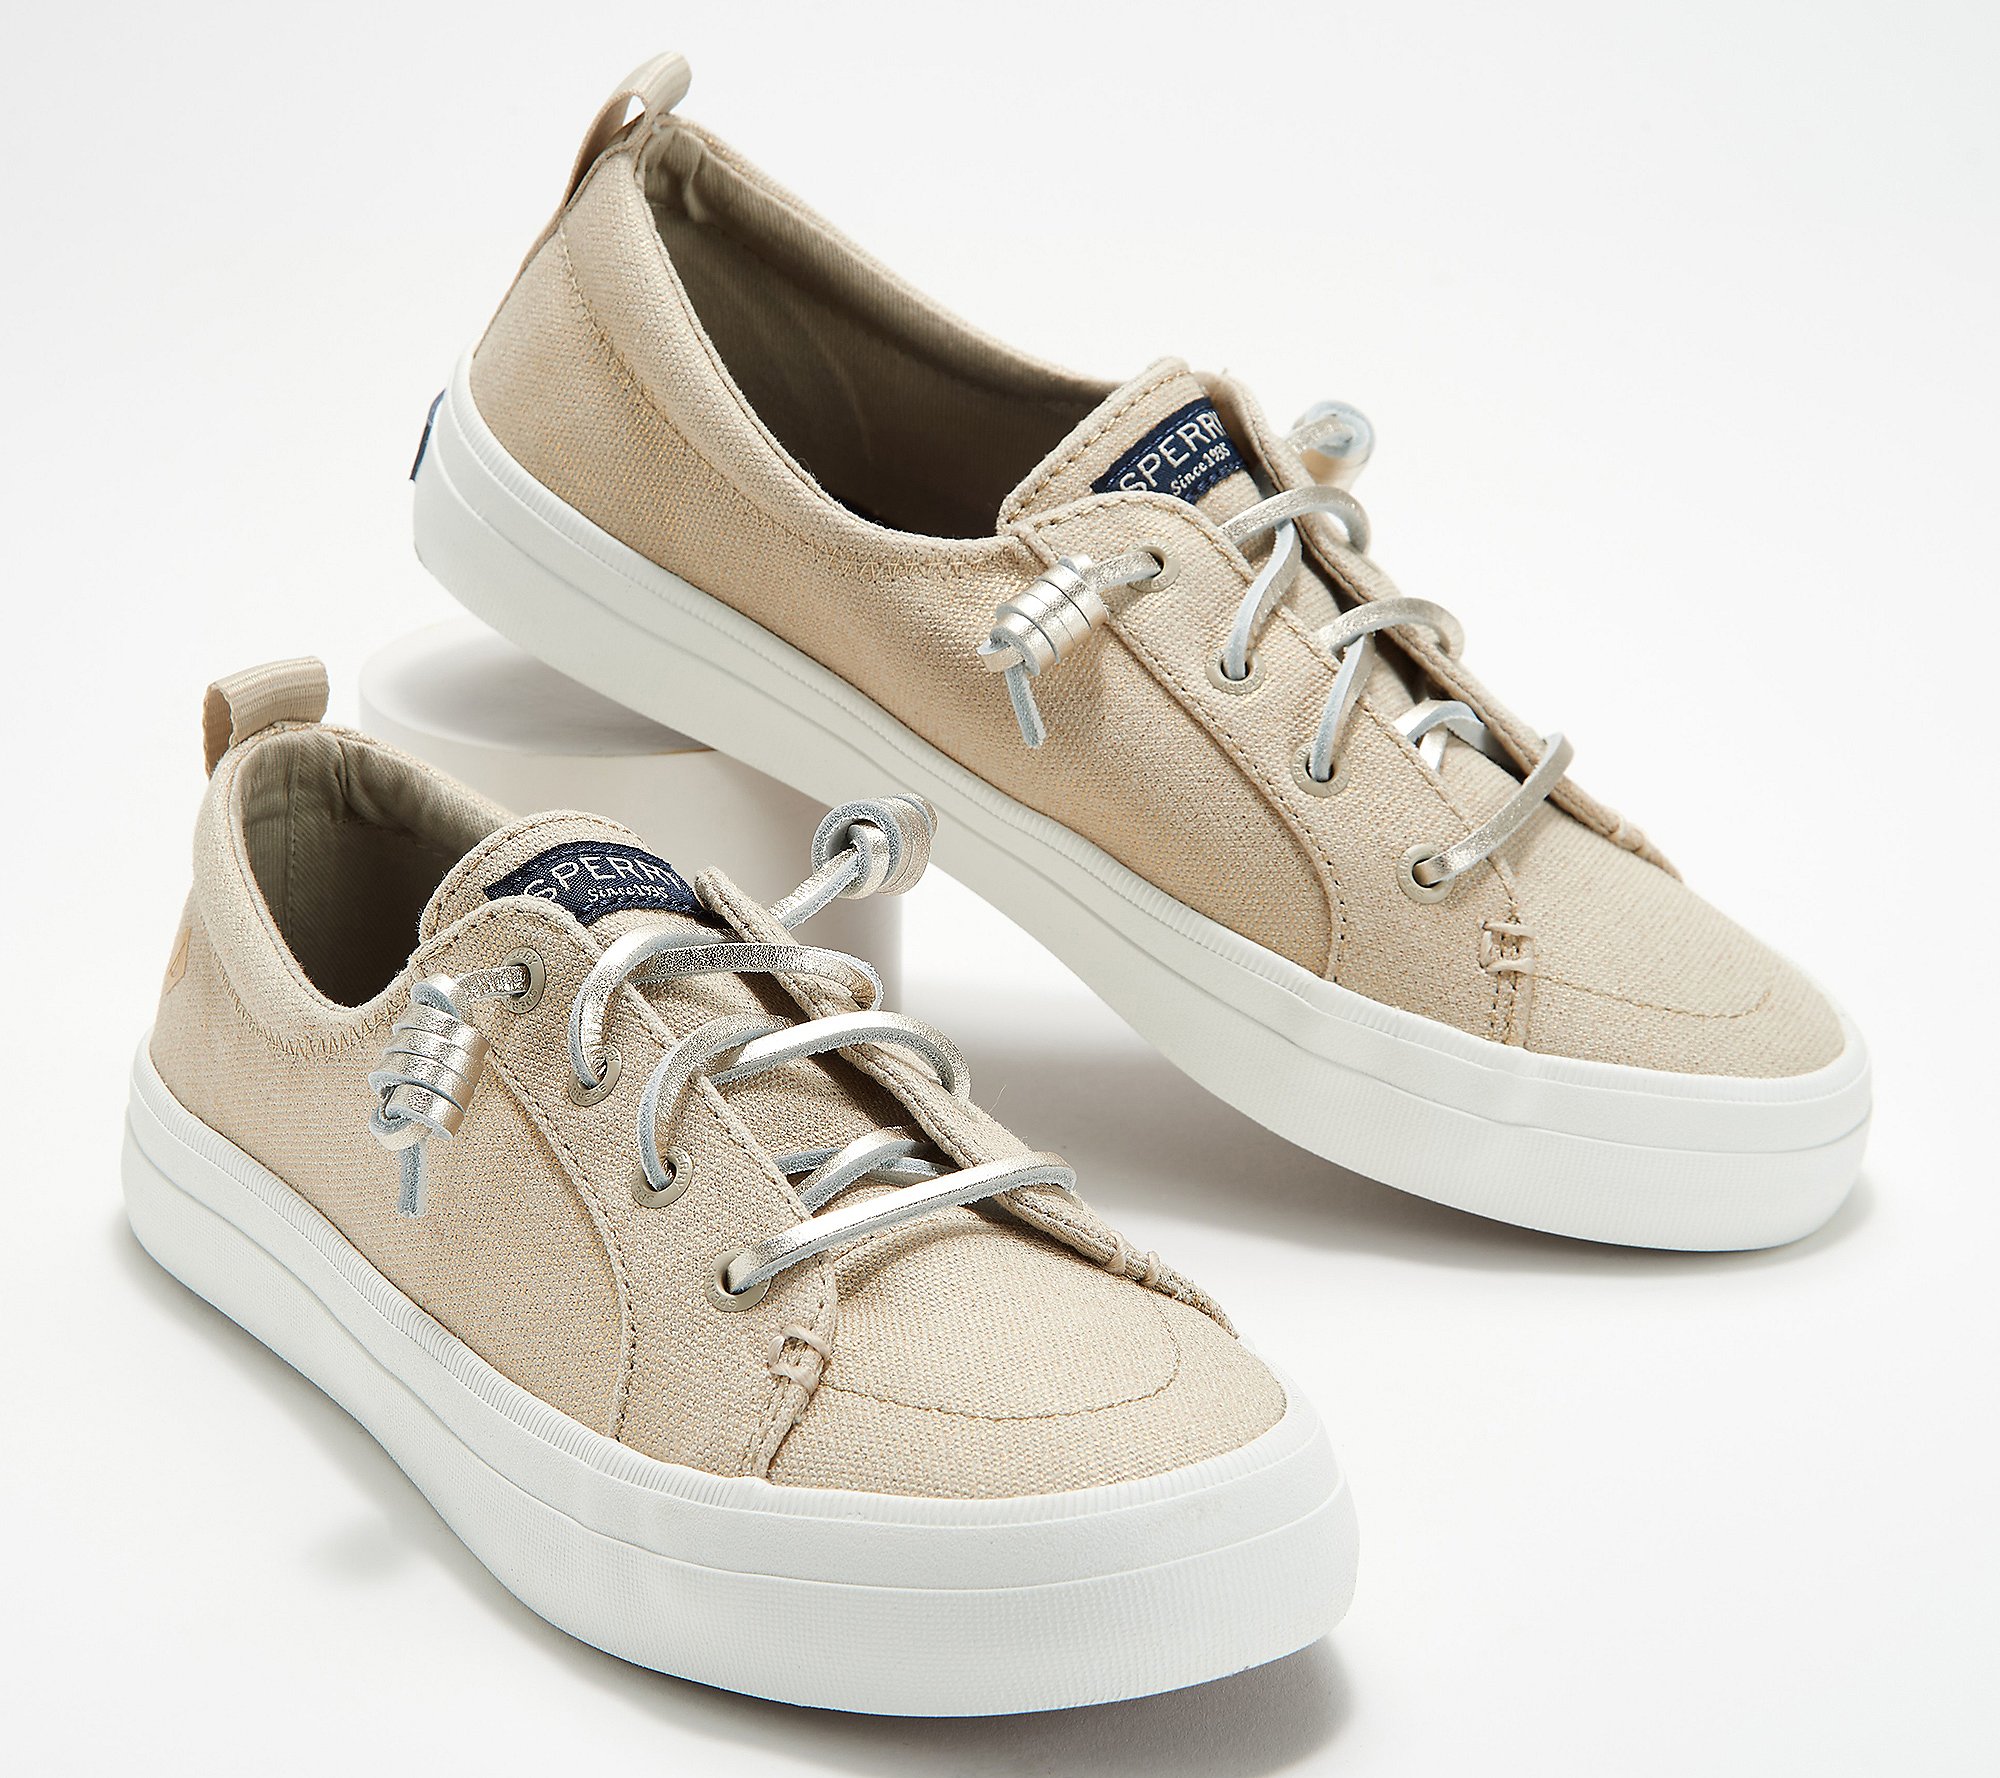 Sperry Crest Vibe Sparkle Sneakers - QVC.com